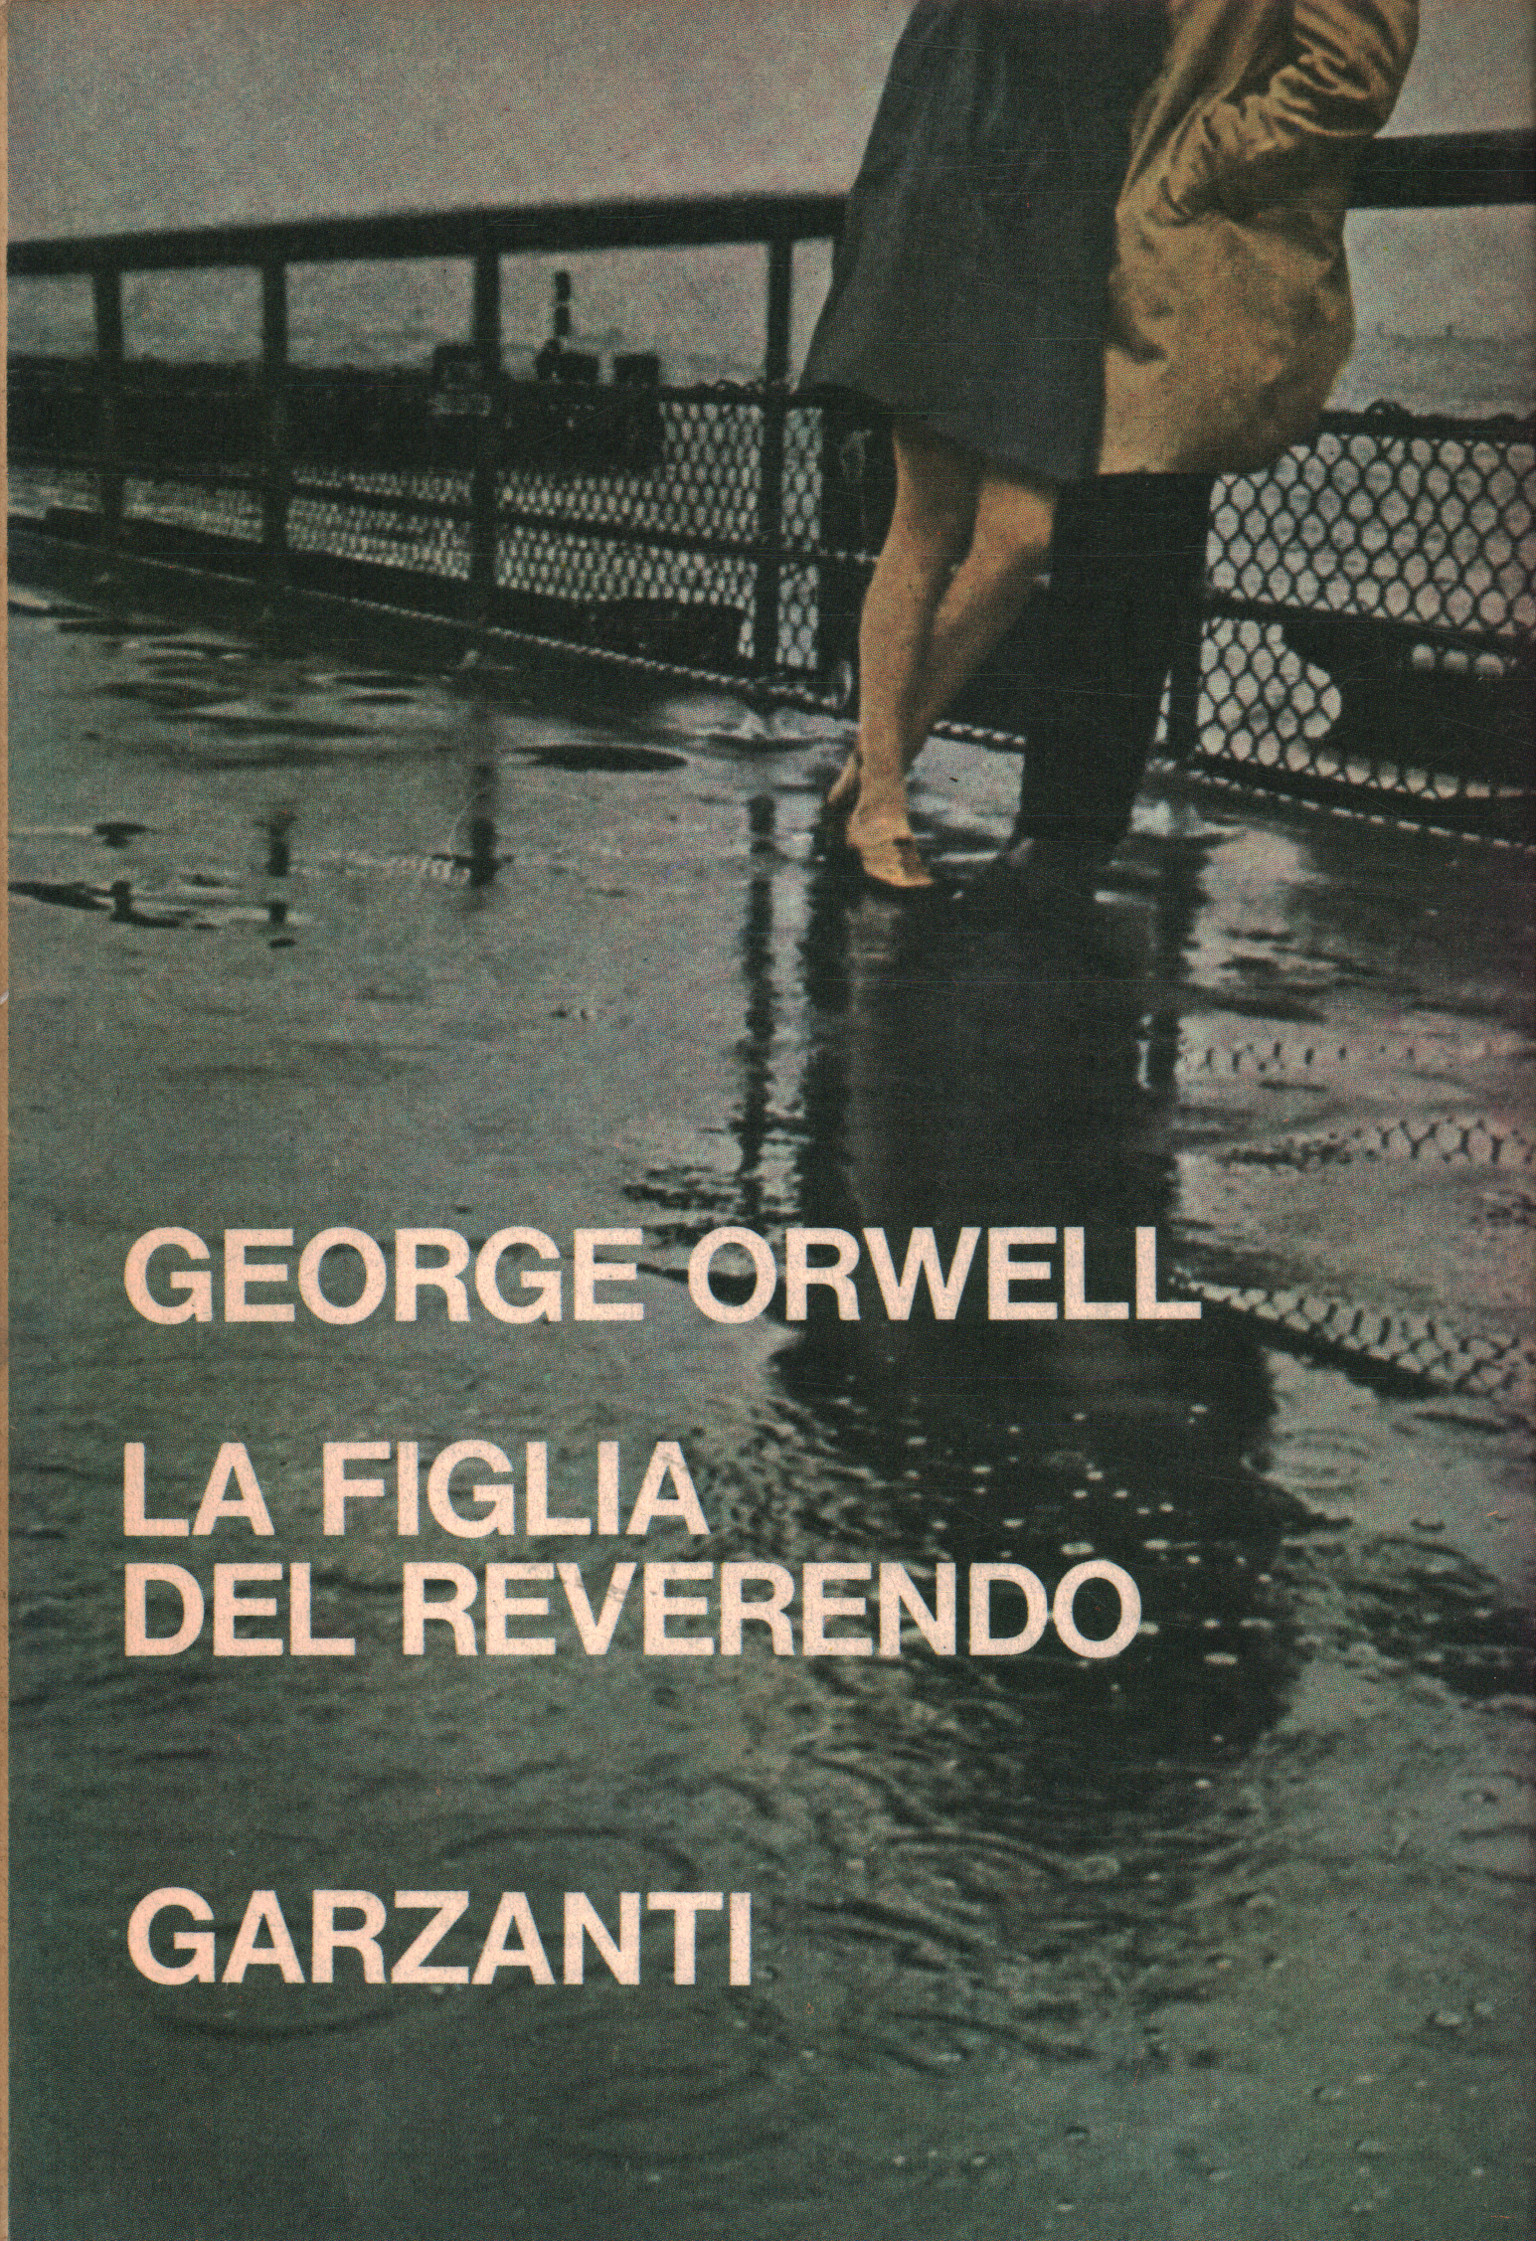 The reverend's daughter, George Orwell